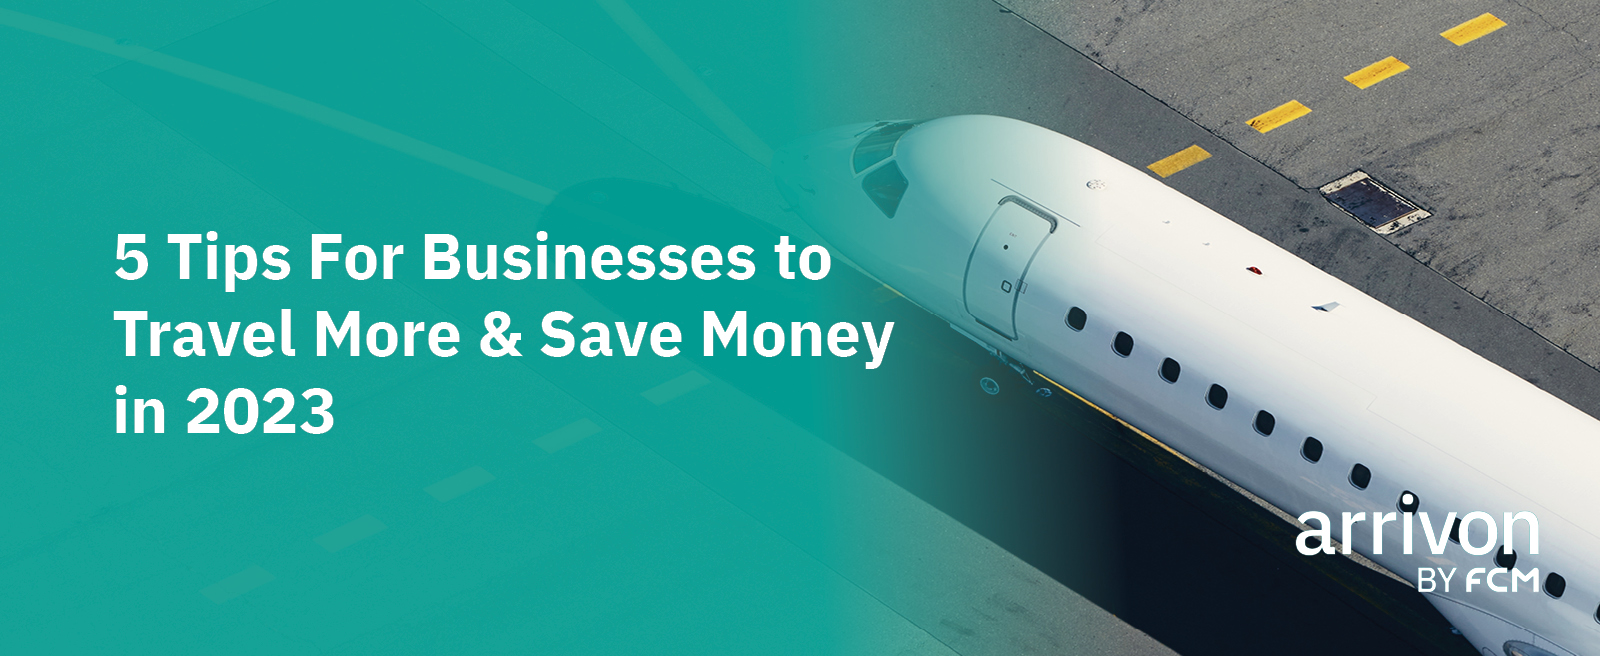 5 tips for business to travel more & save money